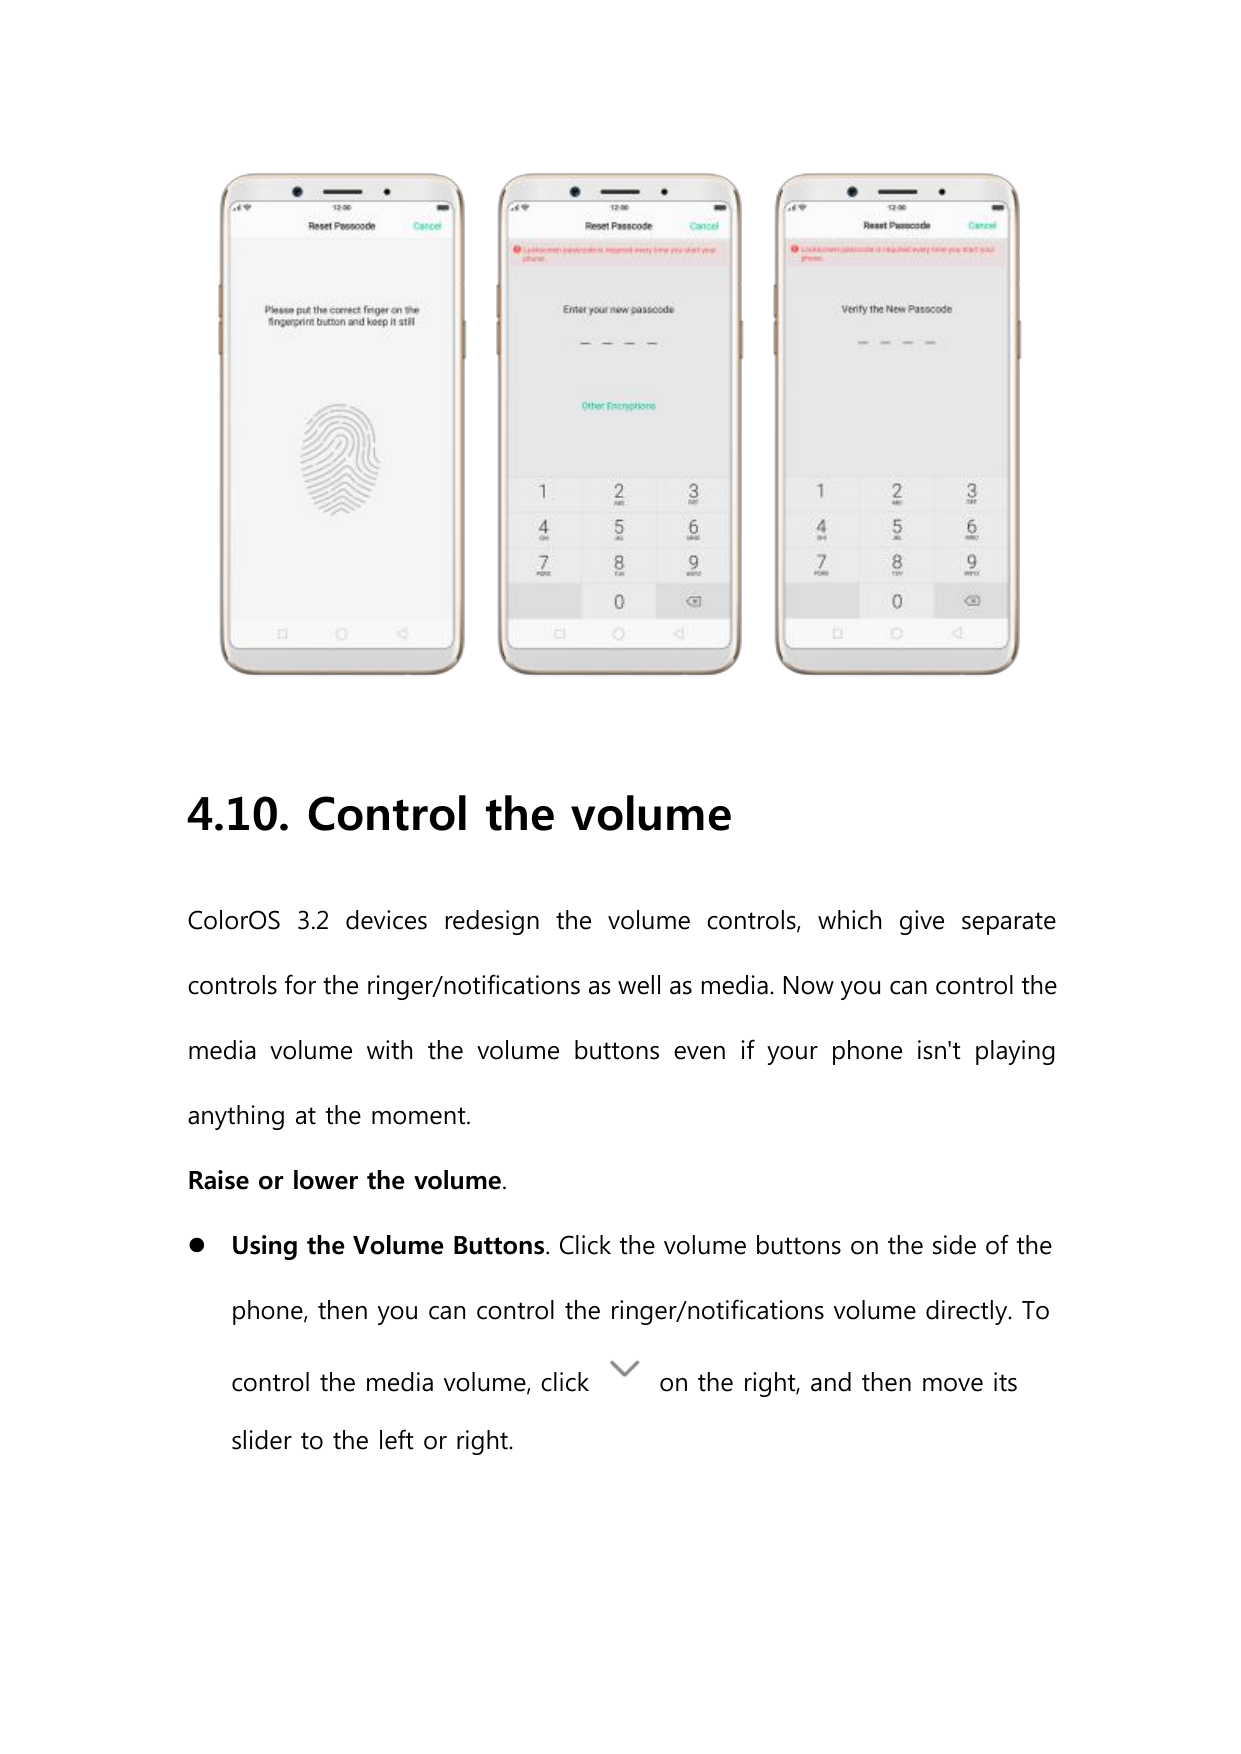 4.10. Control the volumeColorOS 3.2 devices redesign the volume controls, which give separatecontrols for the ringer/notificatio